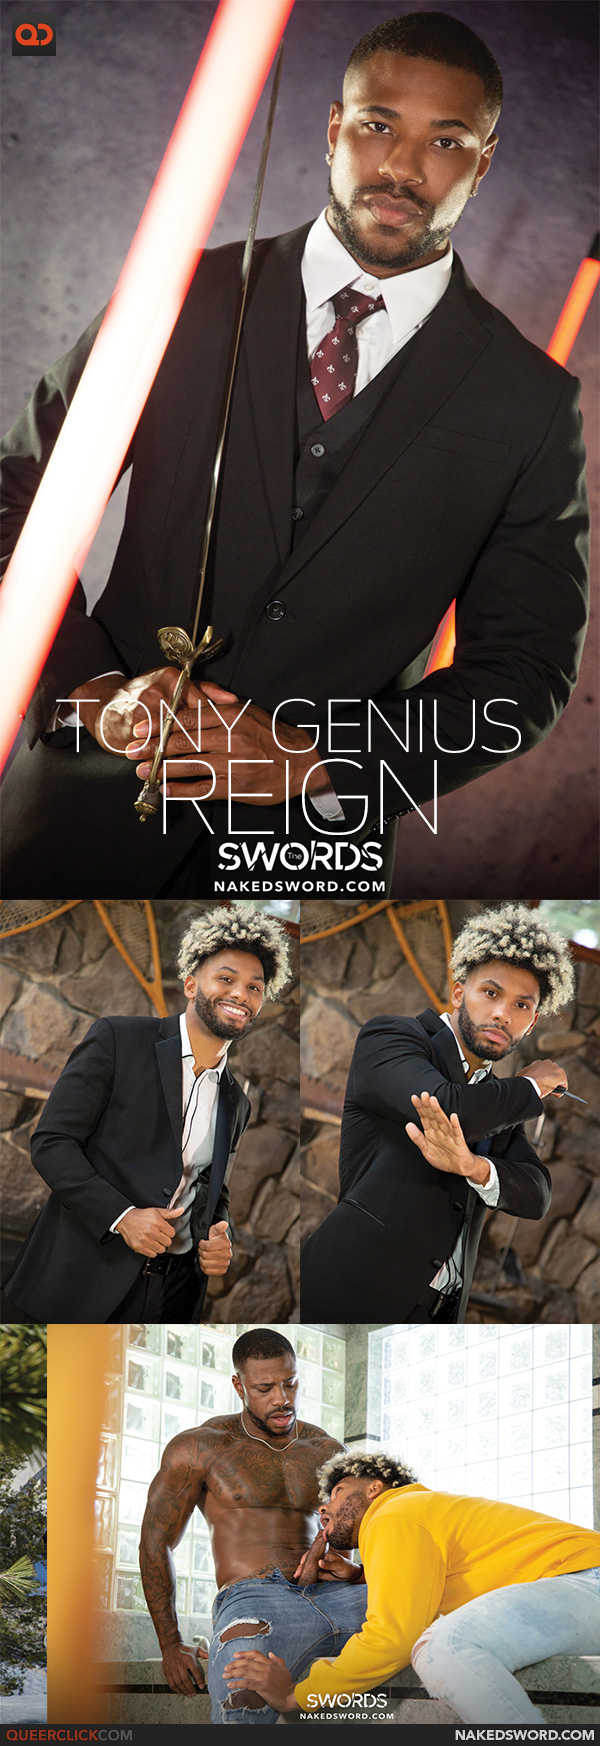 Naked Sword: Reign and Tony Genius - The Swords